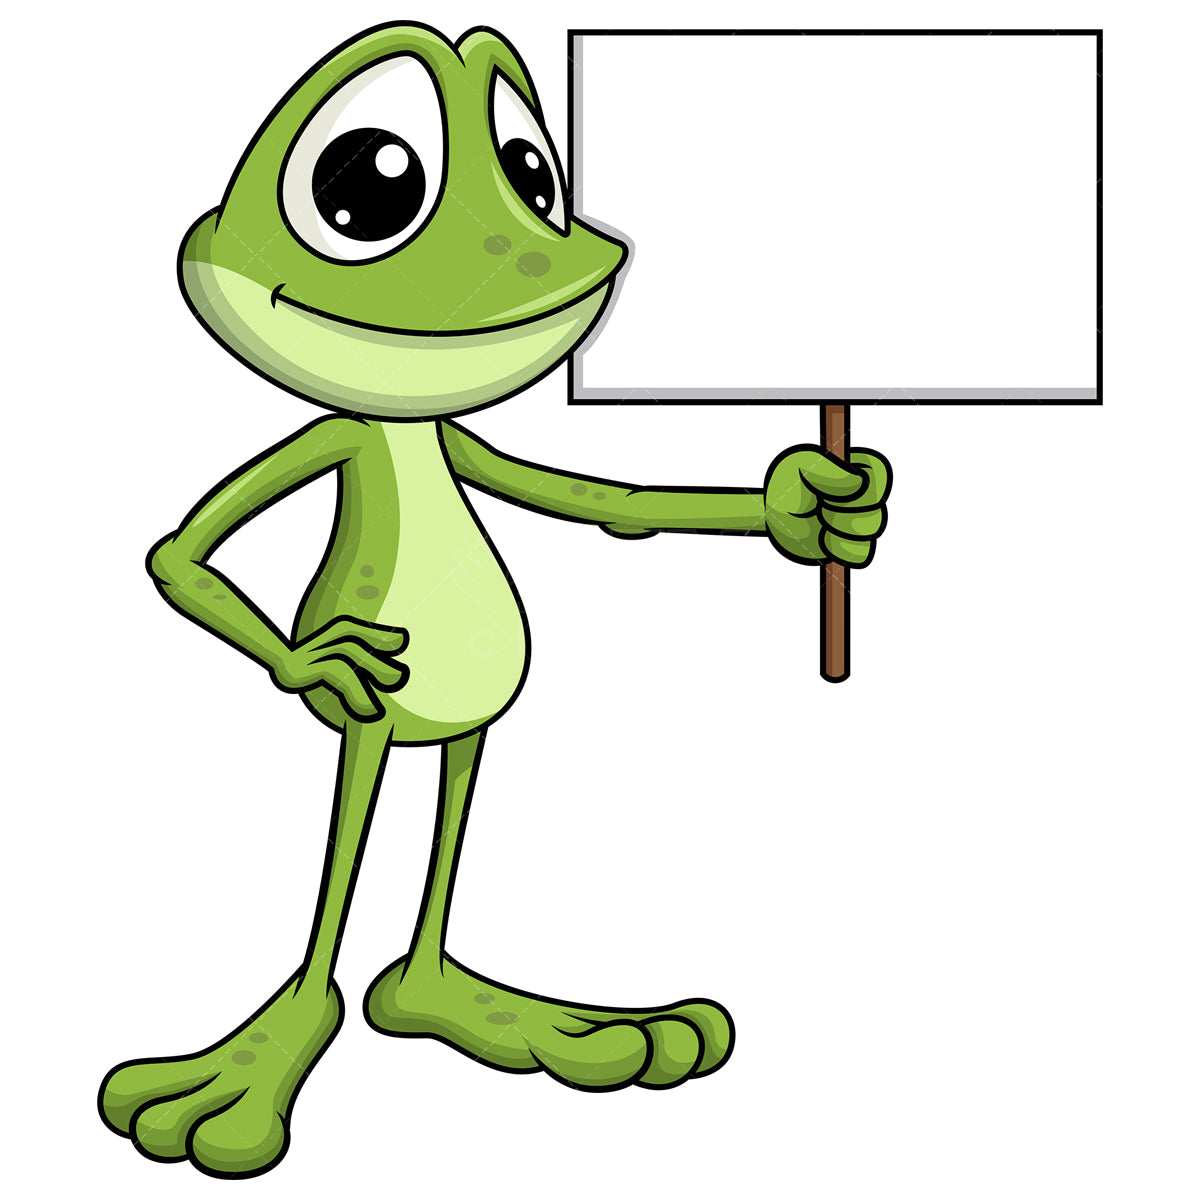 Royalty-free stock vector illustration of  a frog mascot holding blank sign.